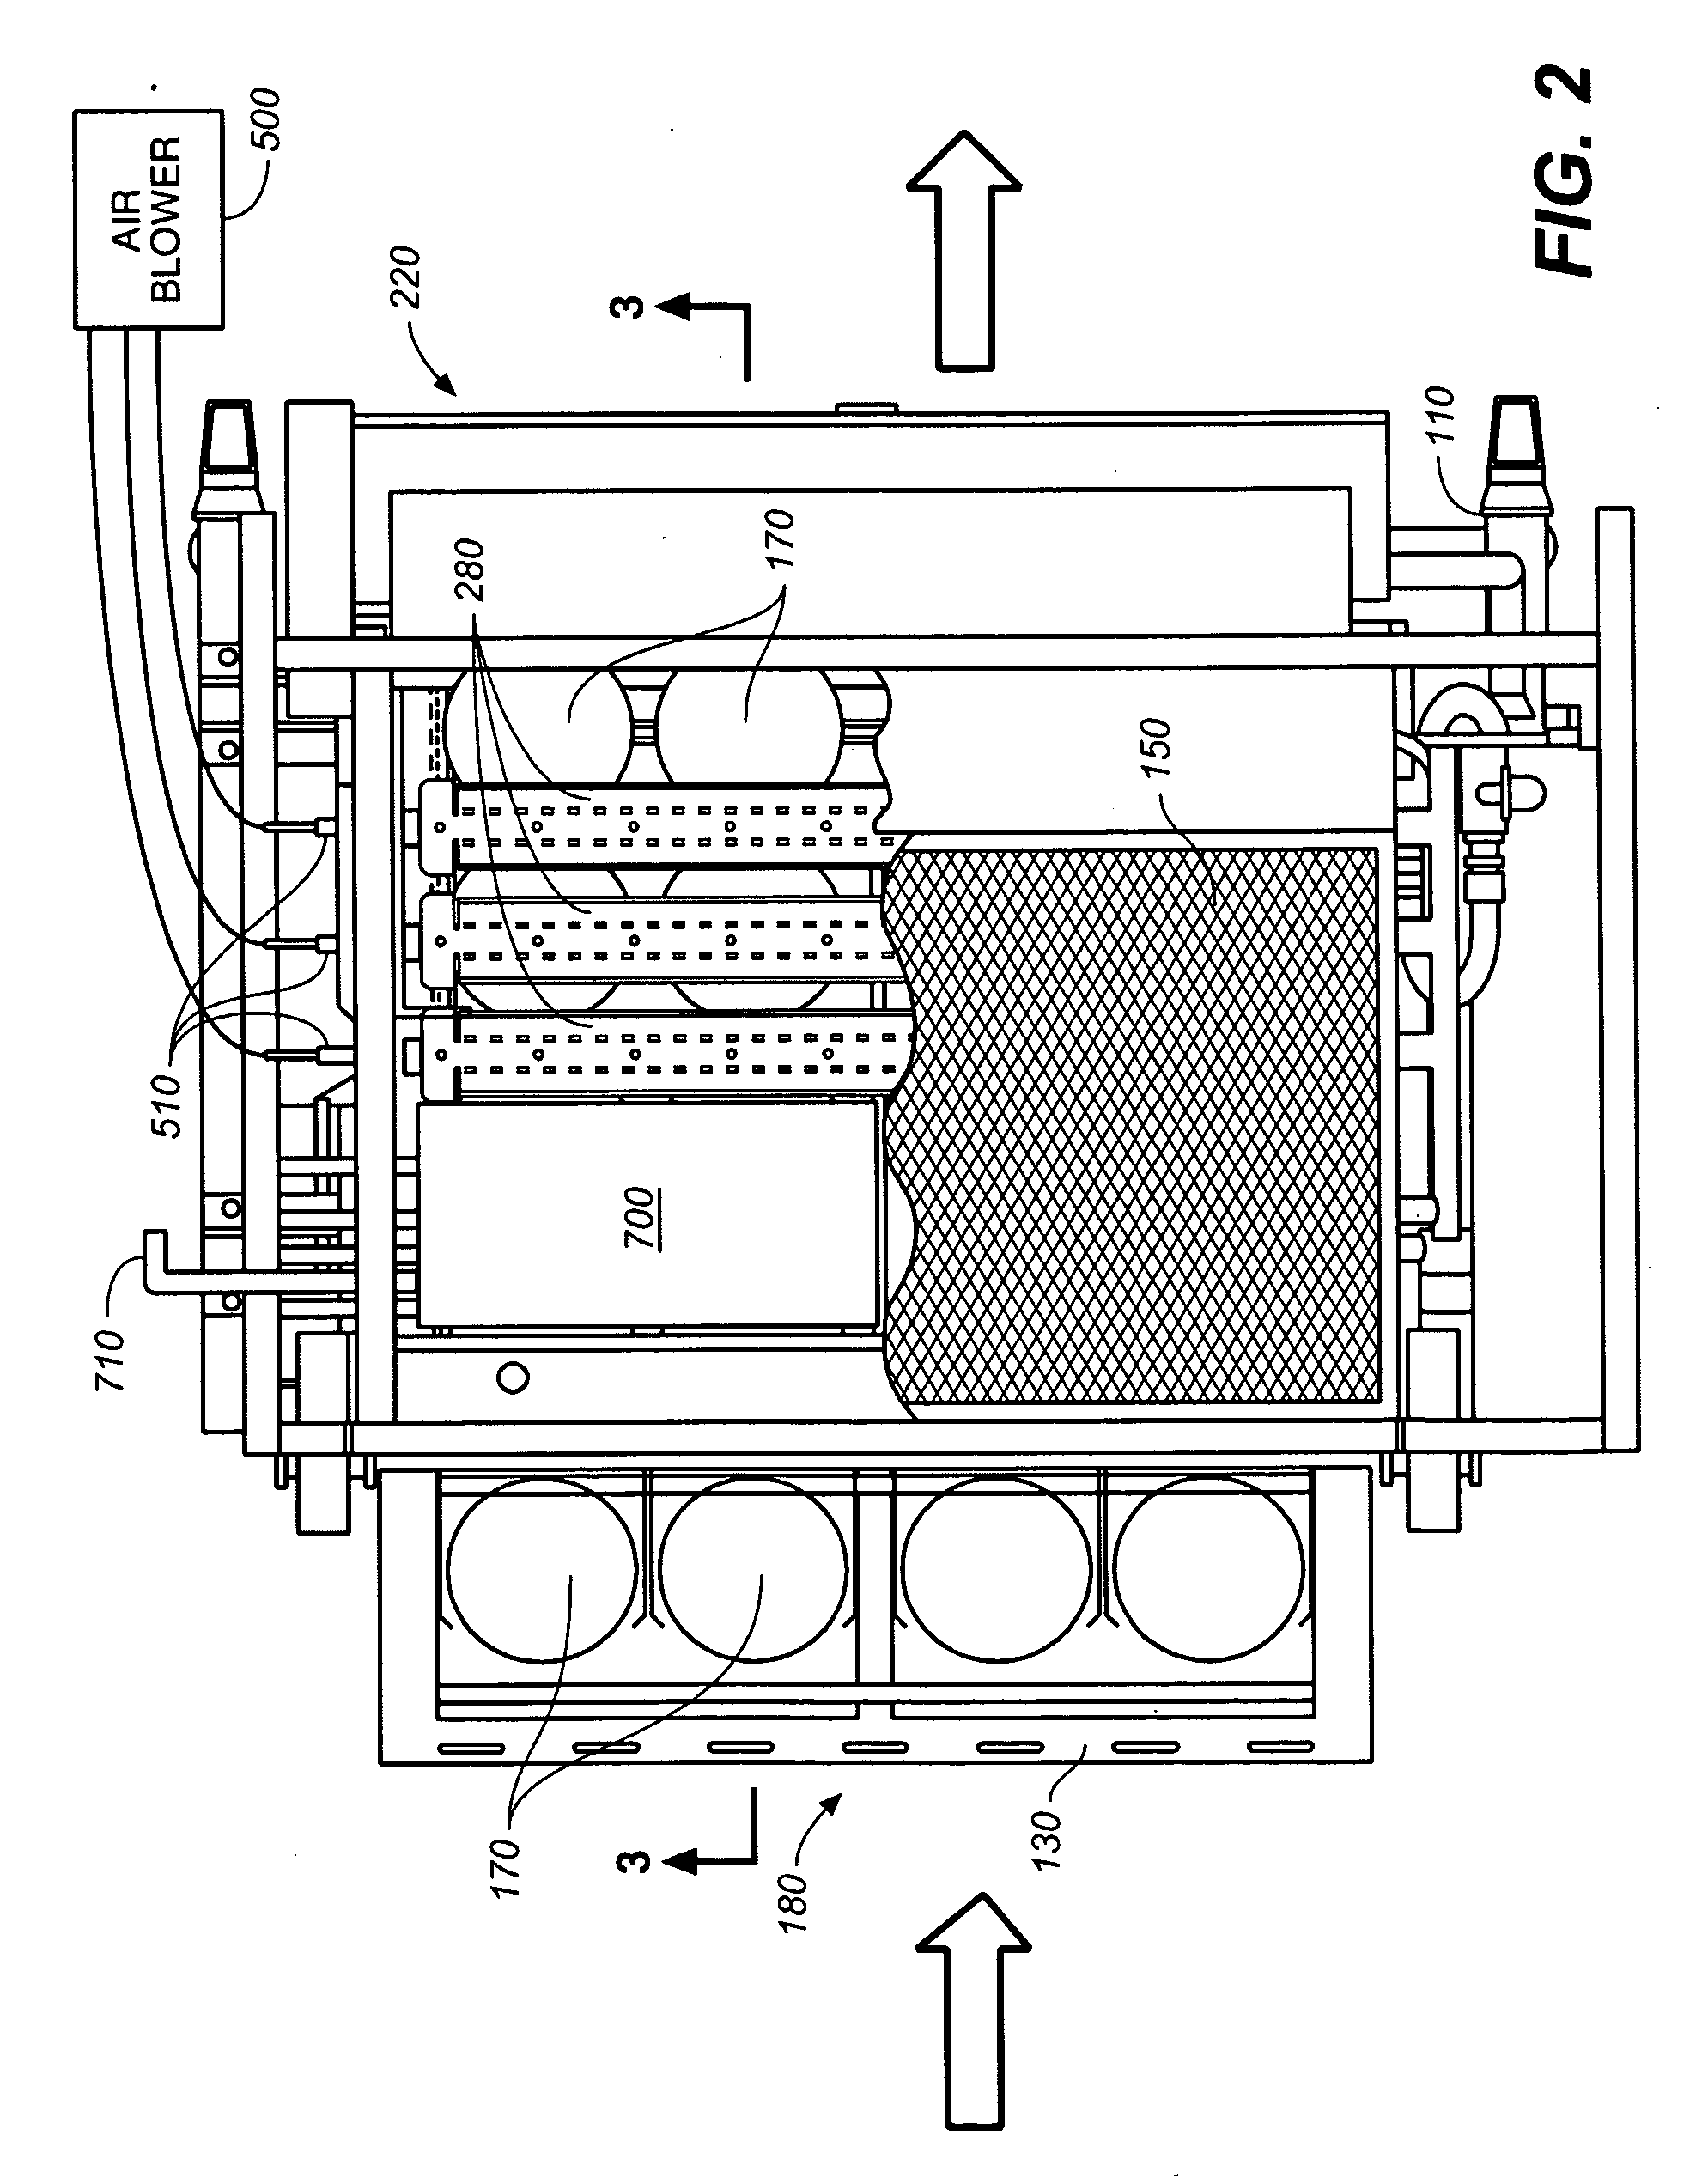 Multi-stage cooking system using radiant, convection, and magnetic induction heating, and having a compressed air heat guide